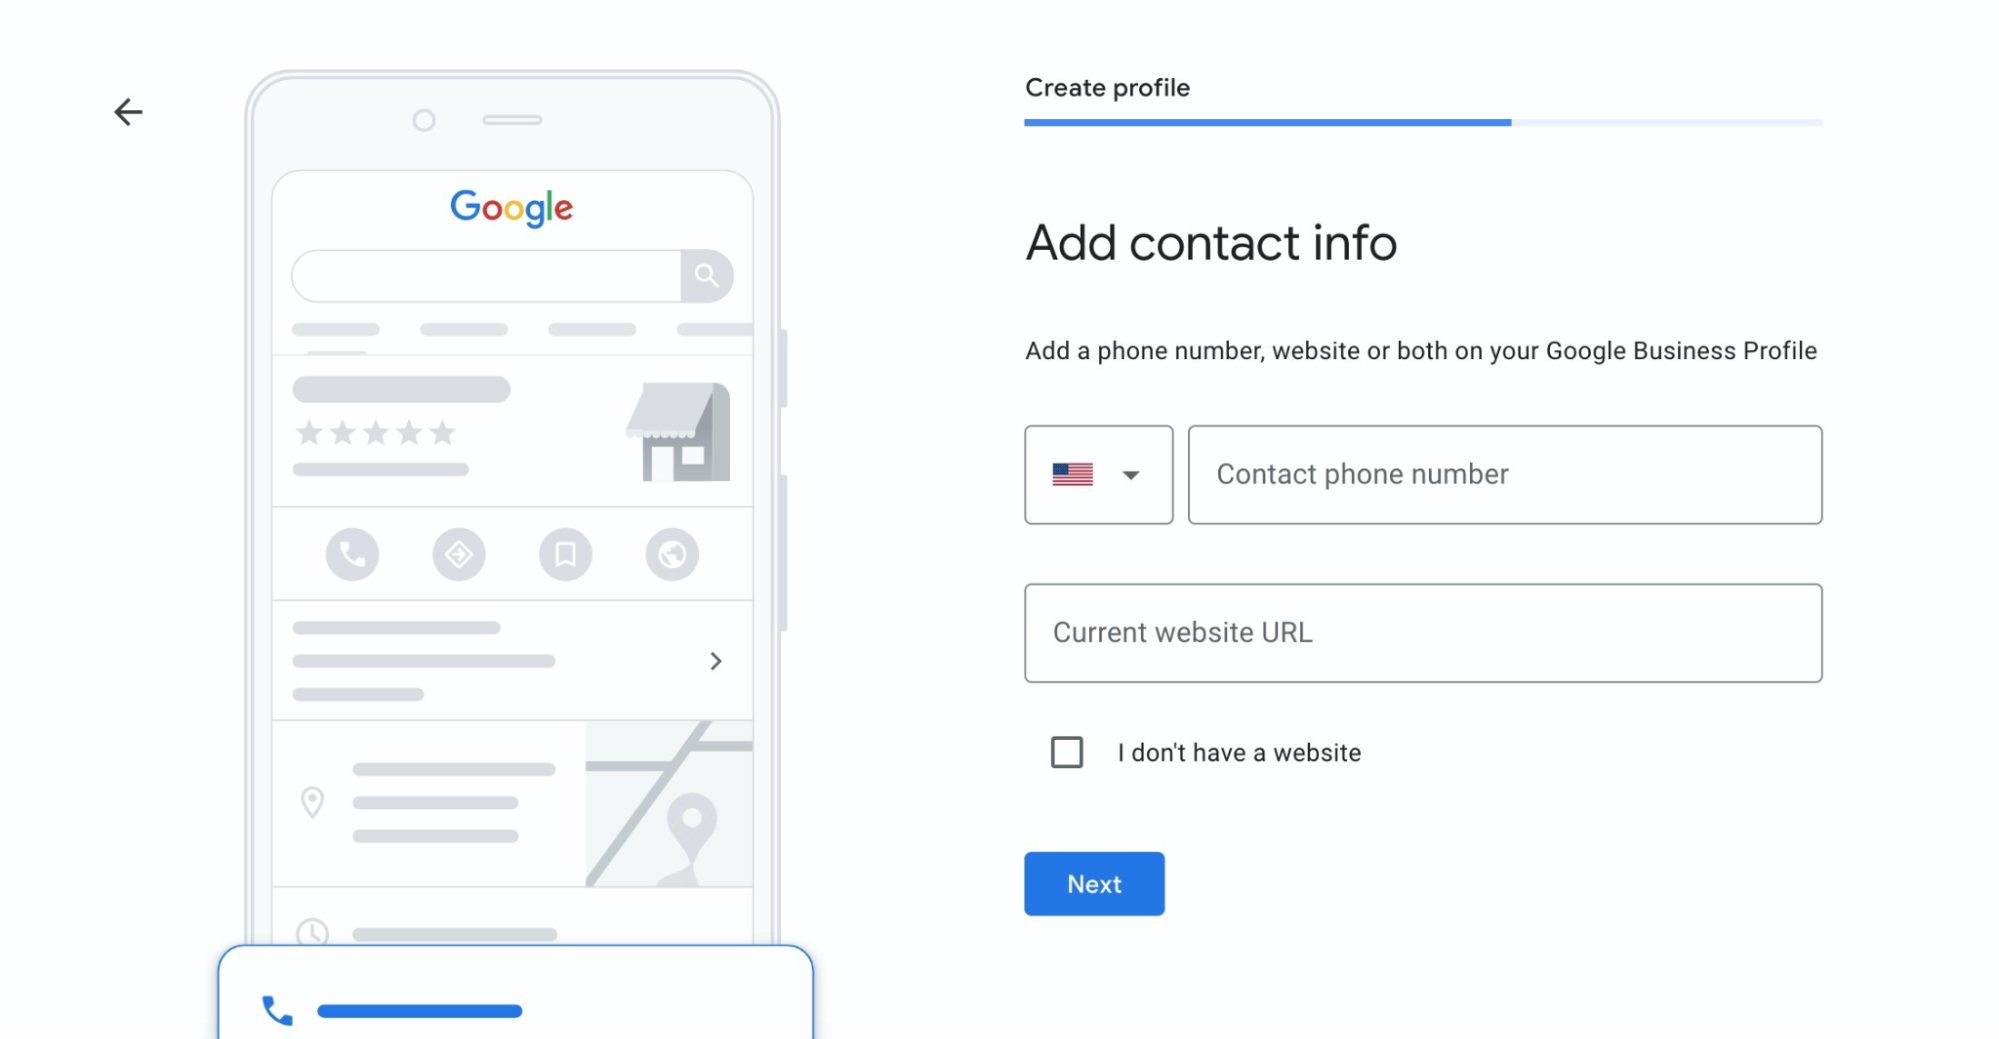 Screenshot of adding contact info on GBP fields for phone number and url